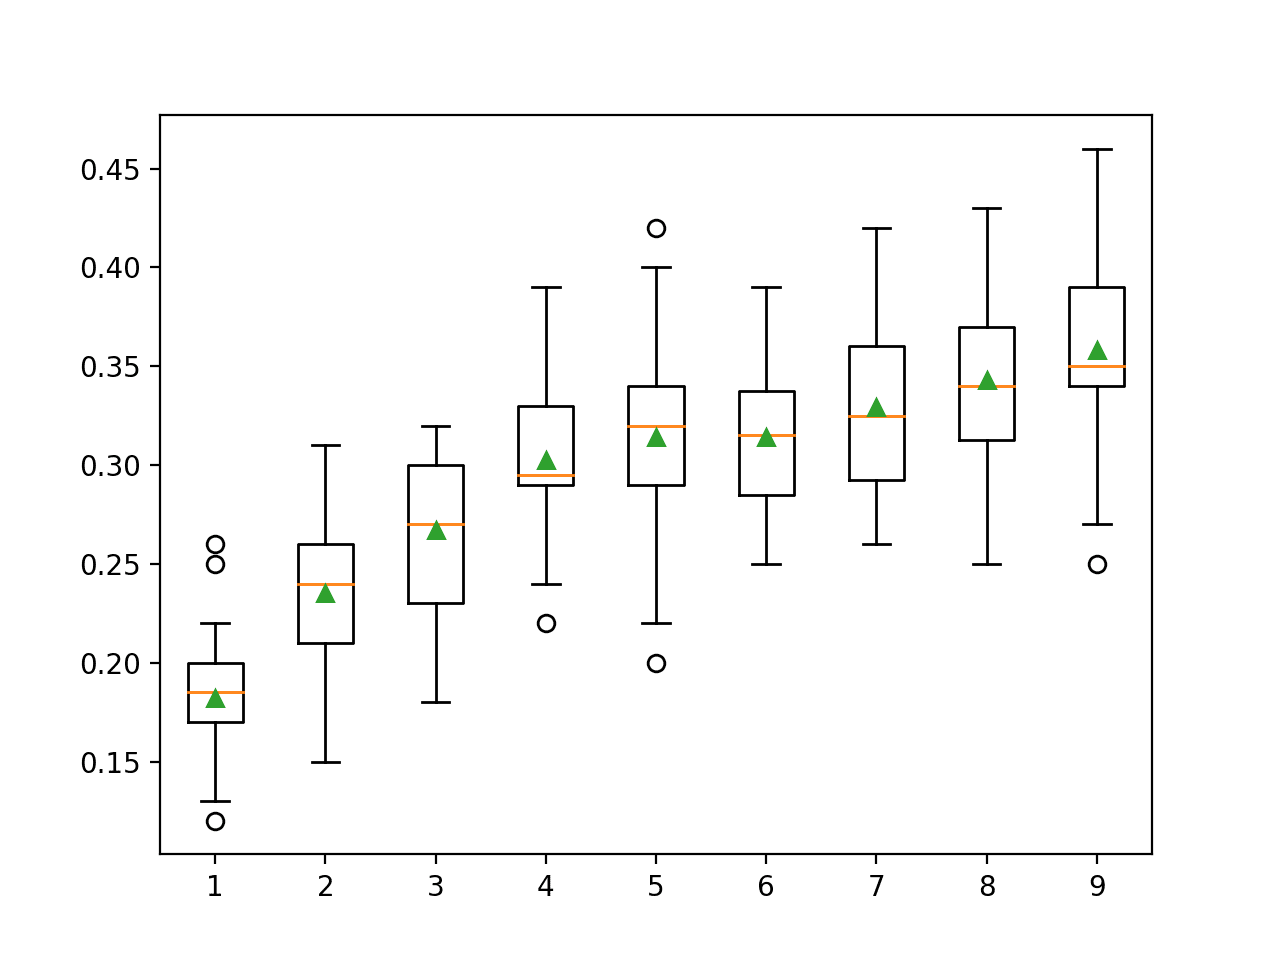 Box Plot of LDA Number of Components vs. Classification Accuracy